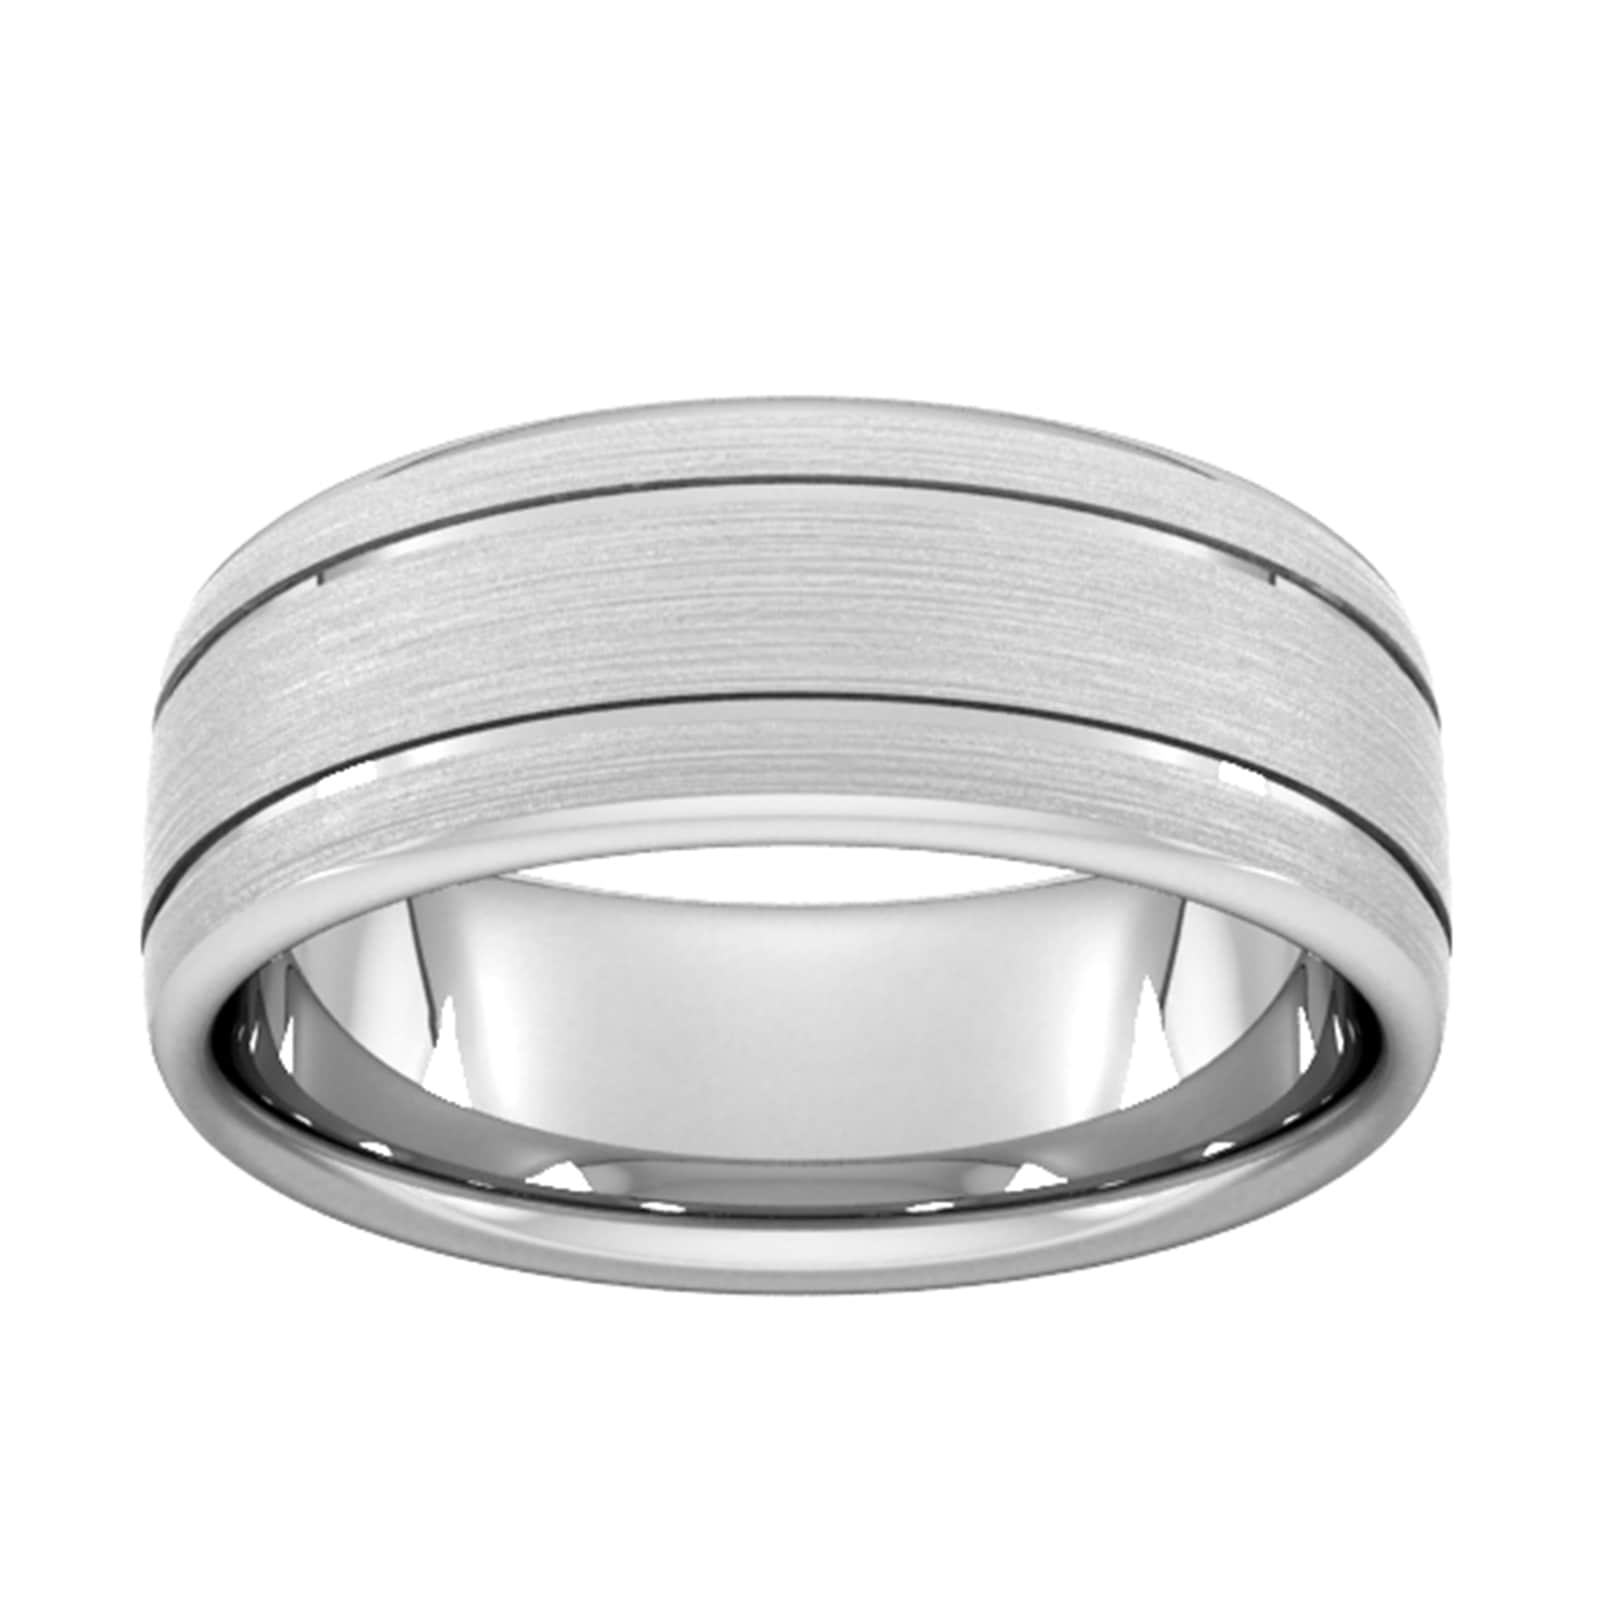 8mm Slight Court Extra Heavy Matt Finish With Double Grooves Wedding Ring In Platinum - Ring Size K